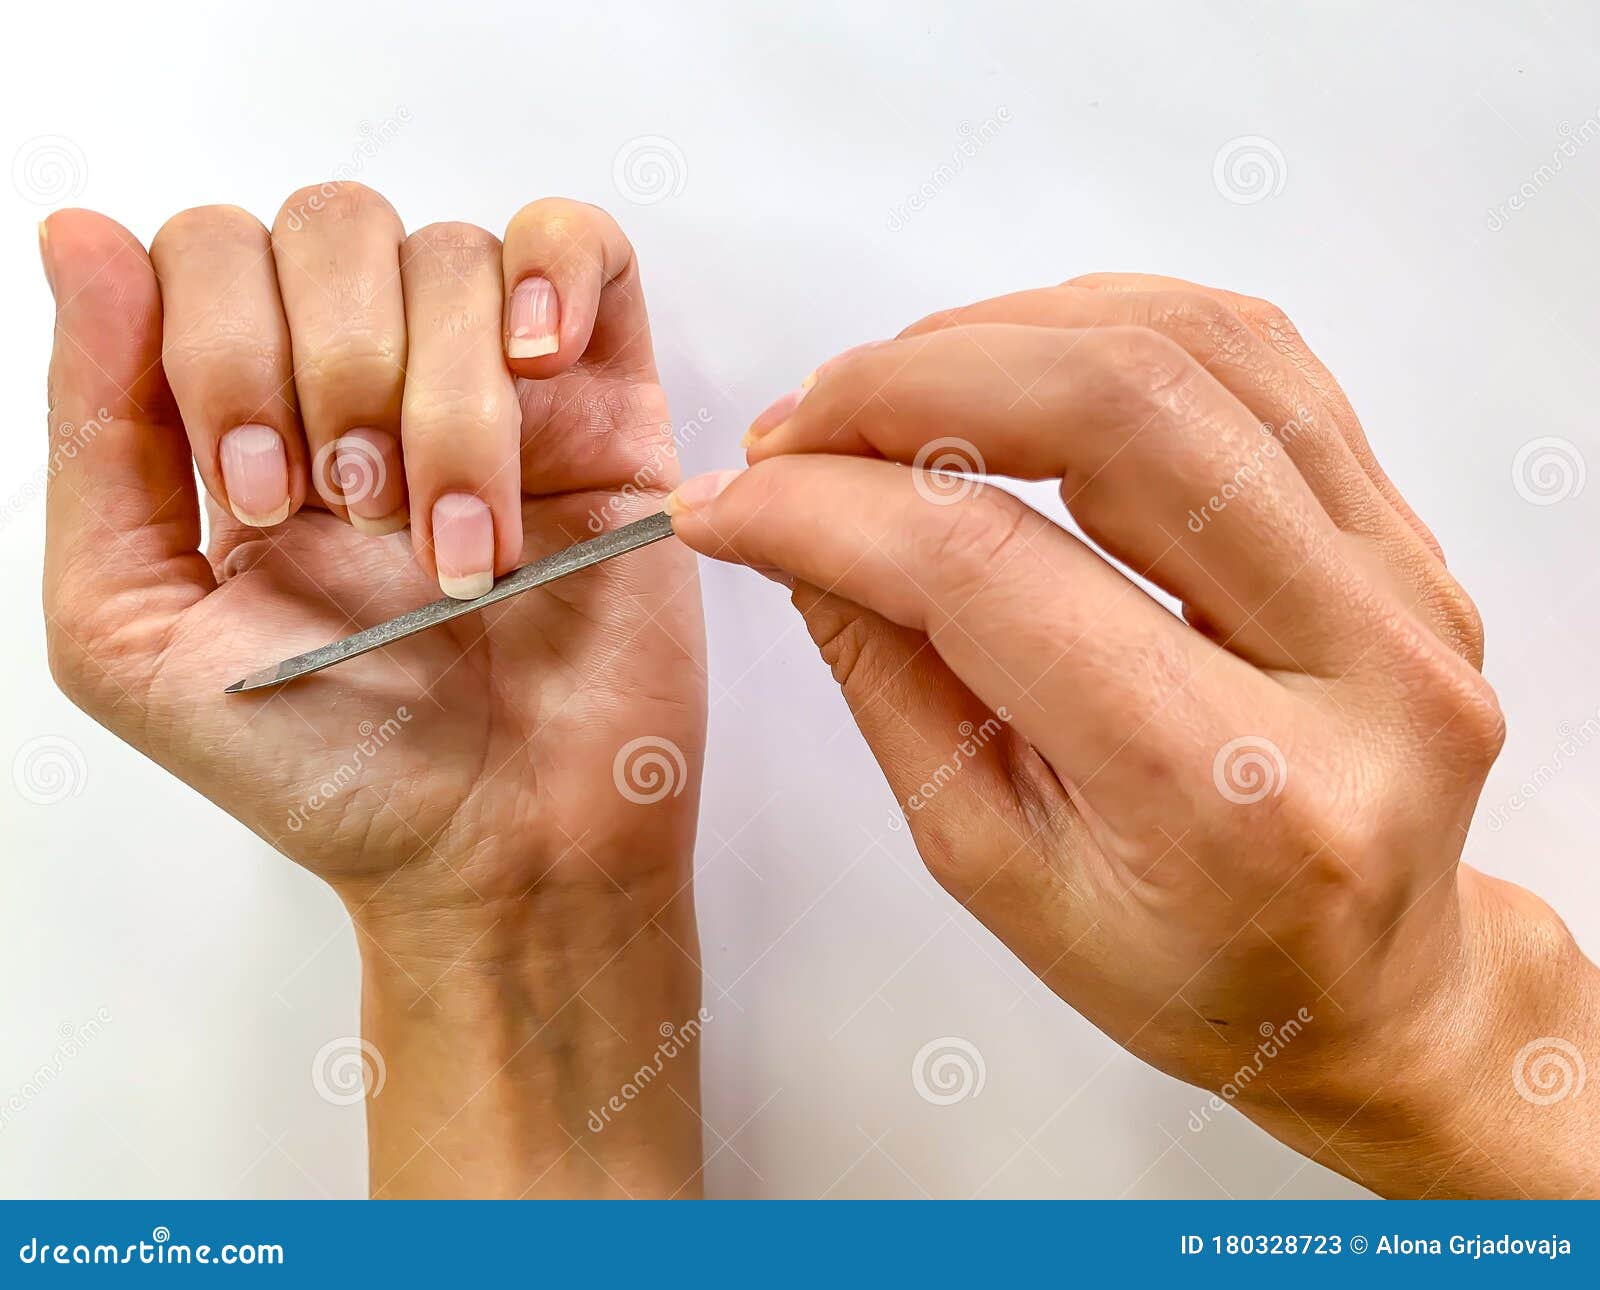 Womans Girls Hand Filing Nails With Metal Nail File On A White